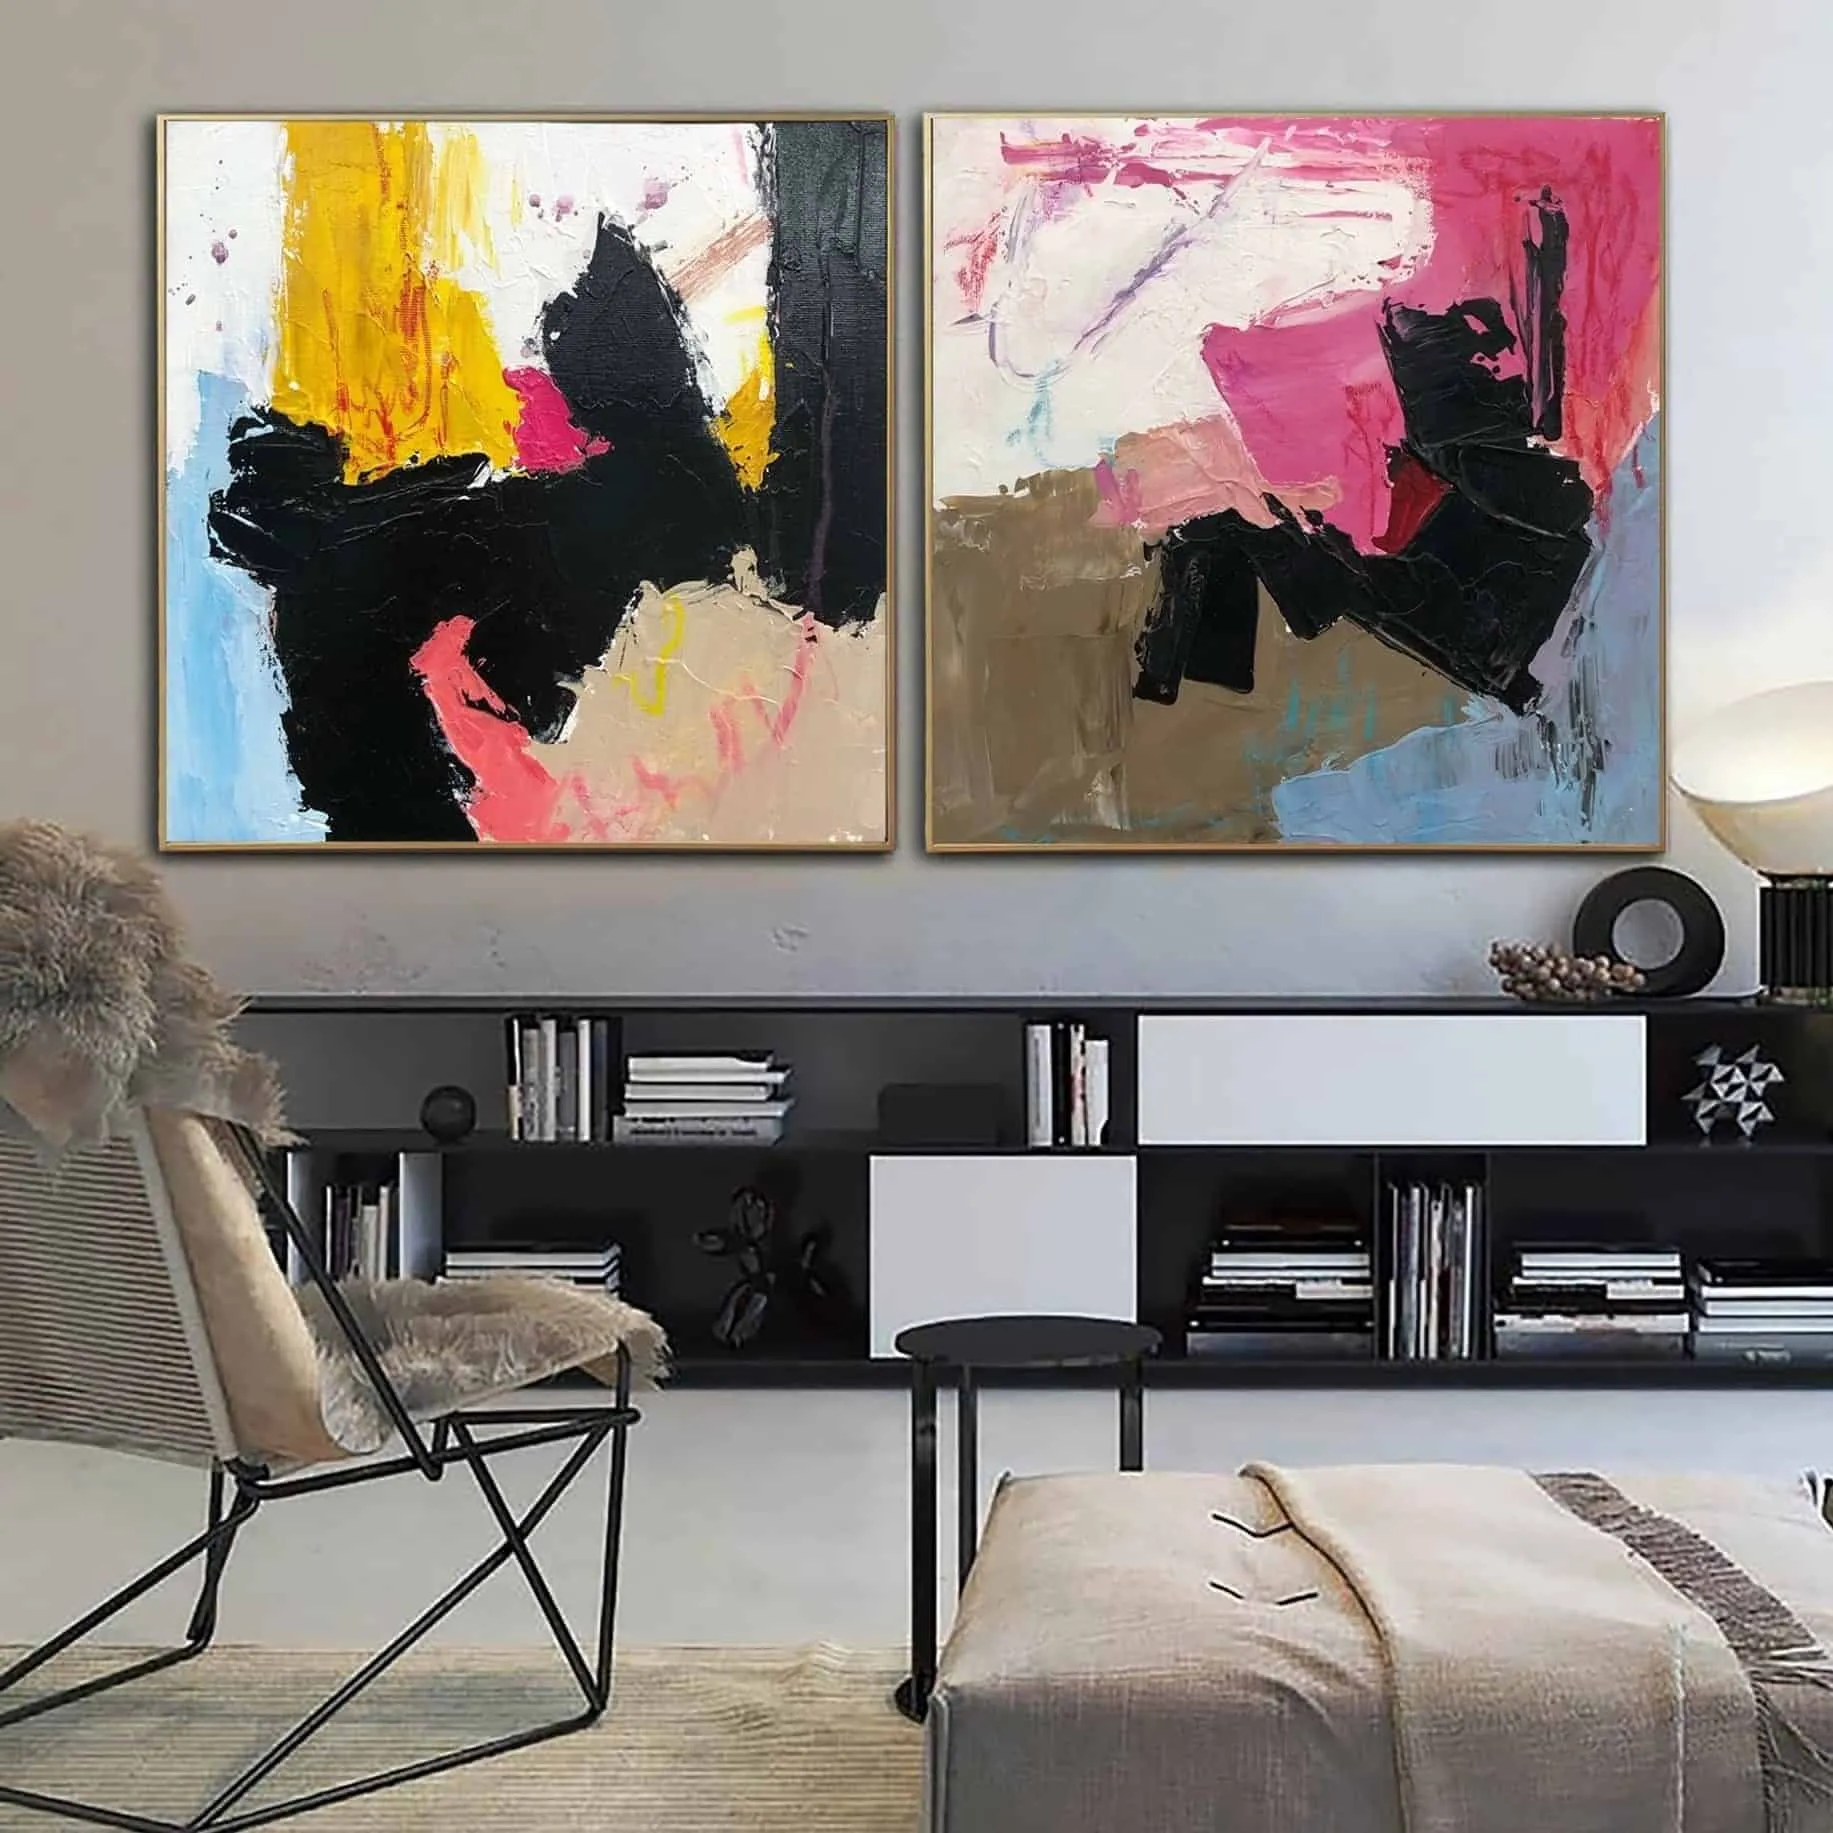 An graceful abstract artwork hanged in a living room.